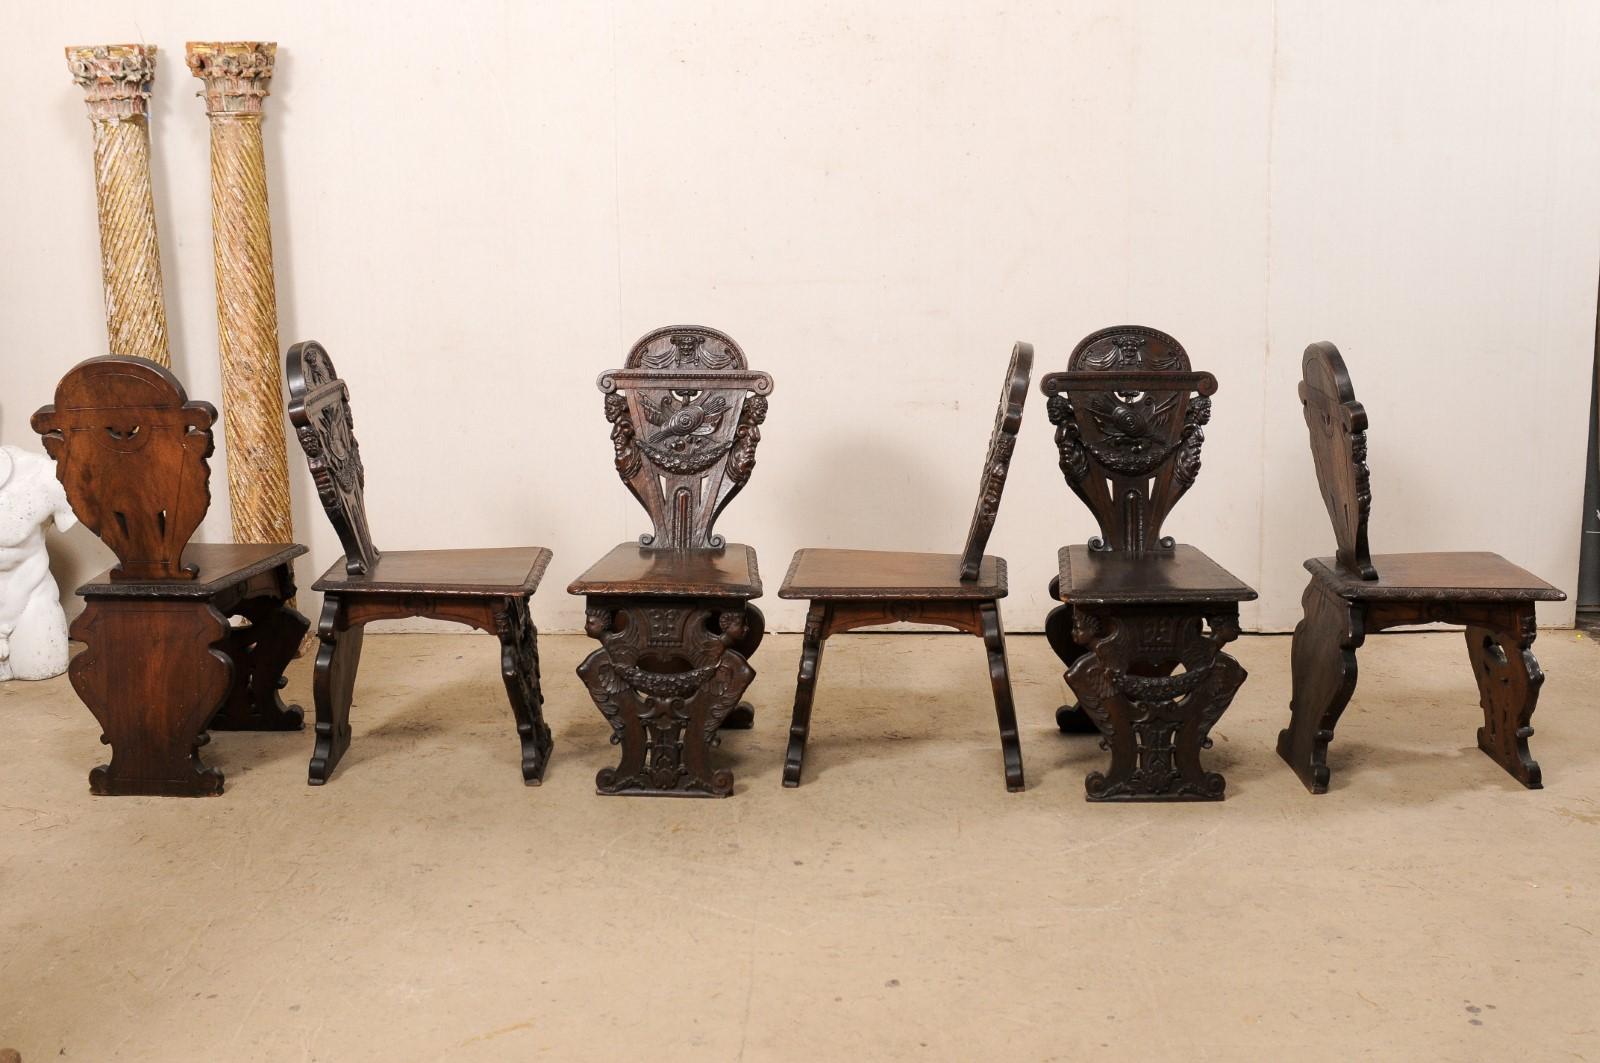 Set of 6 English Renaissance Ornately-Carved Hall Chairs, Turn of 19th & 20th C For Sale 6